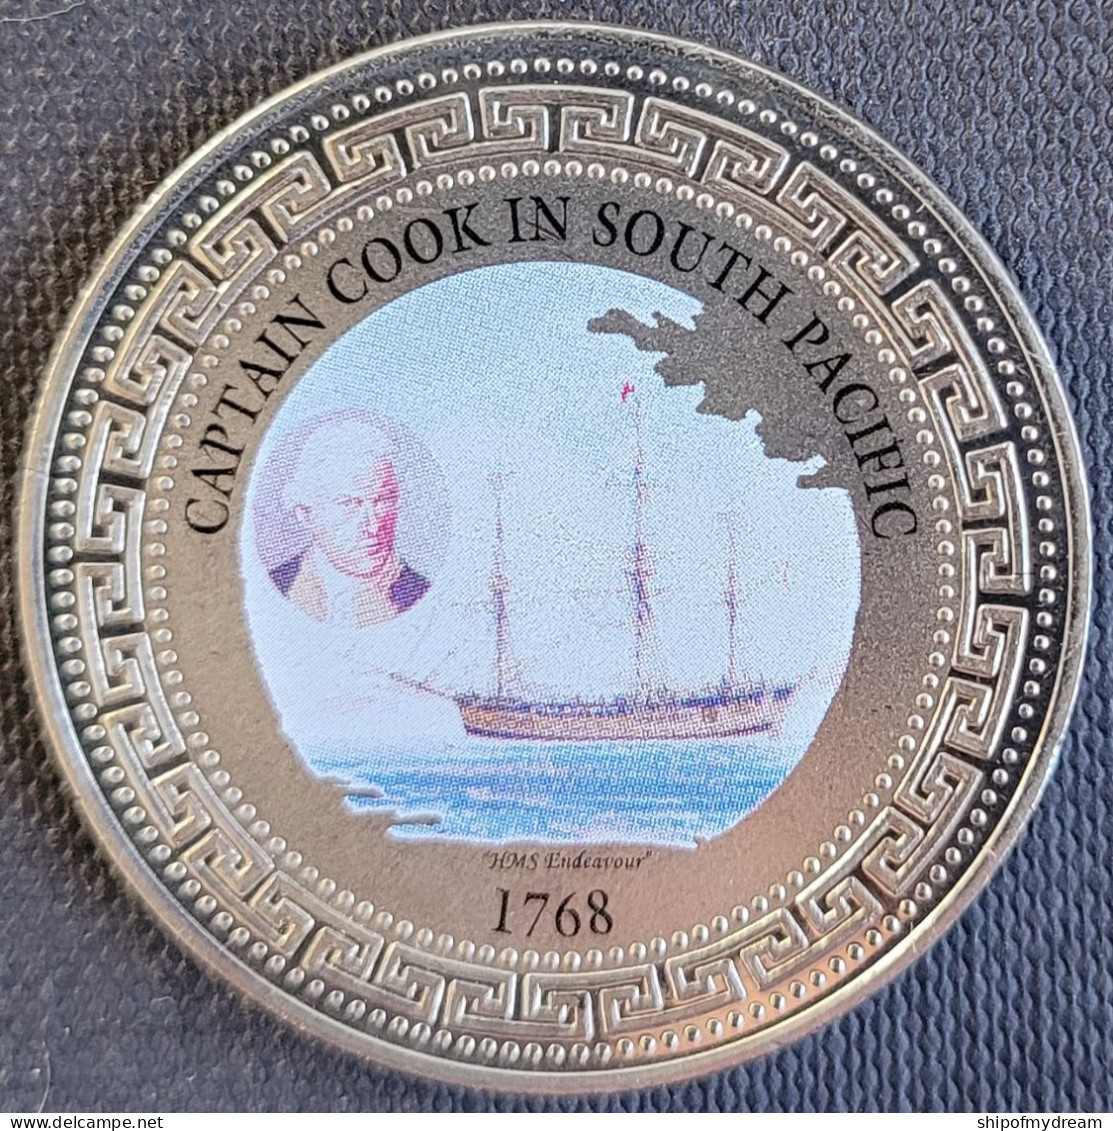 UK Trade Dollar 1998. Captain Cook In South Pacific. HMS Endeavor. 1768 - 2 Pounds